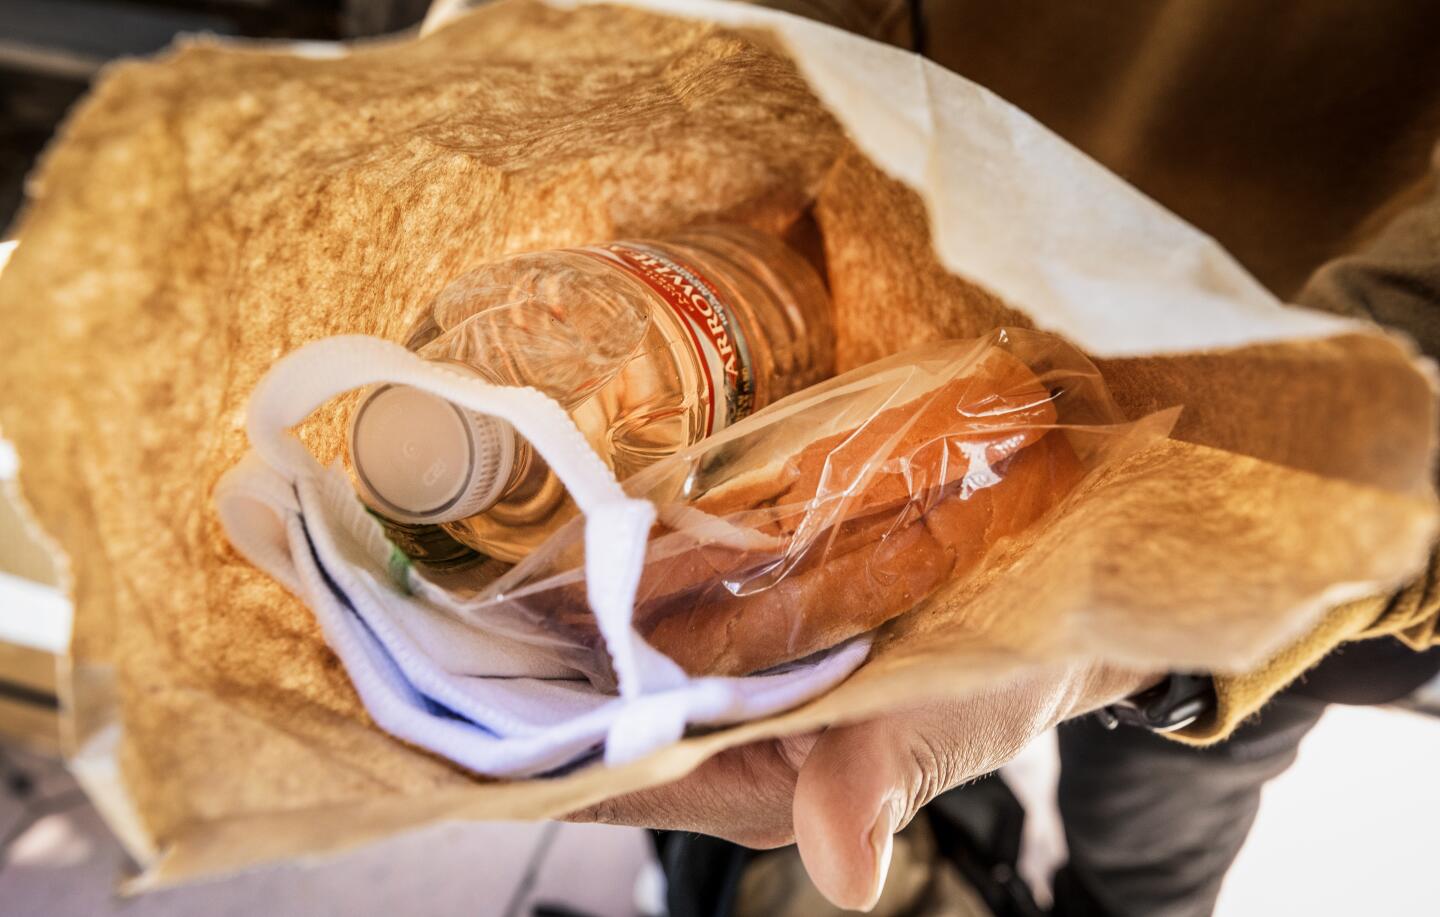 Bicycle Meals delivers bagged meals of a sandwich, chips and water, as well as a mask.